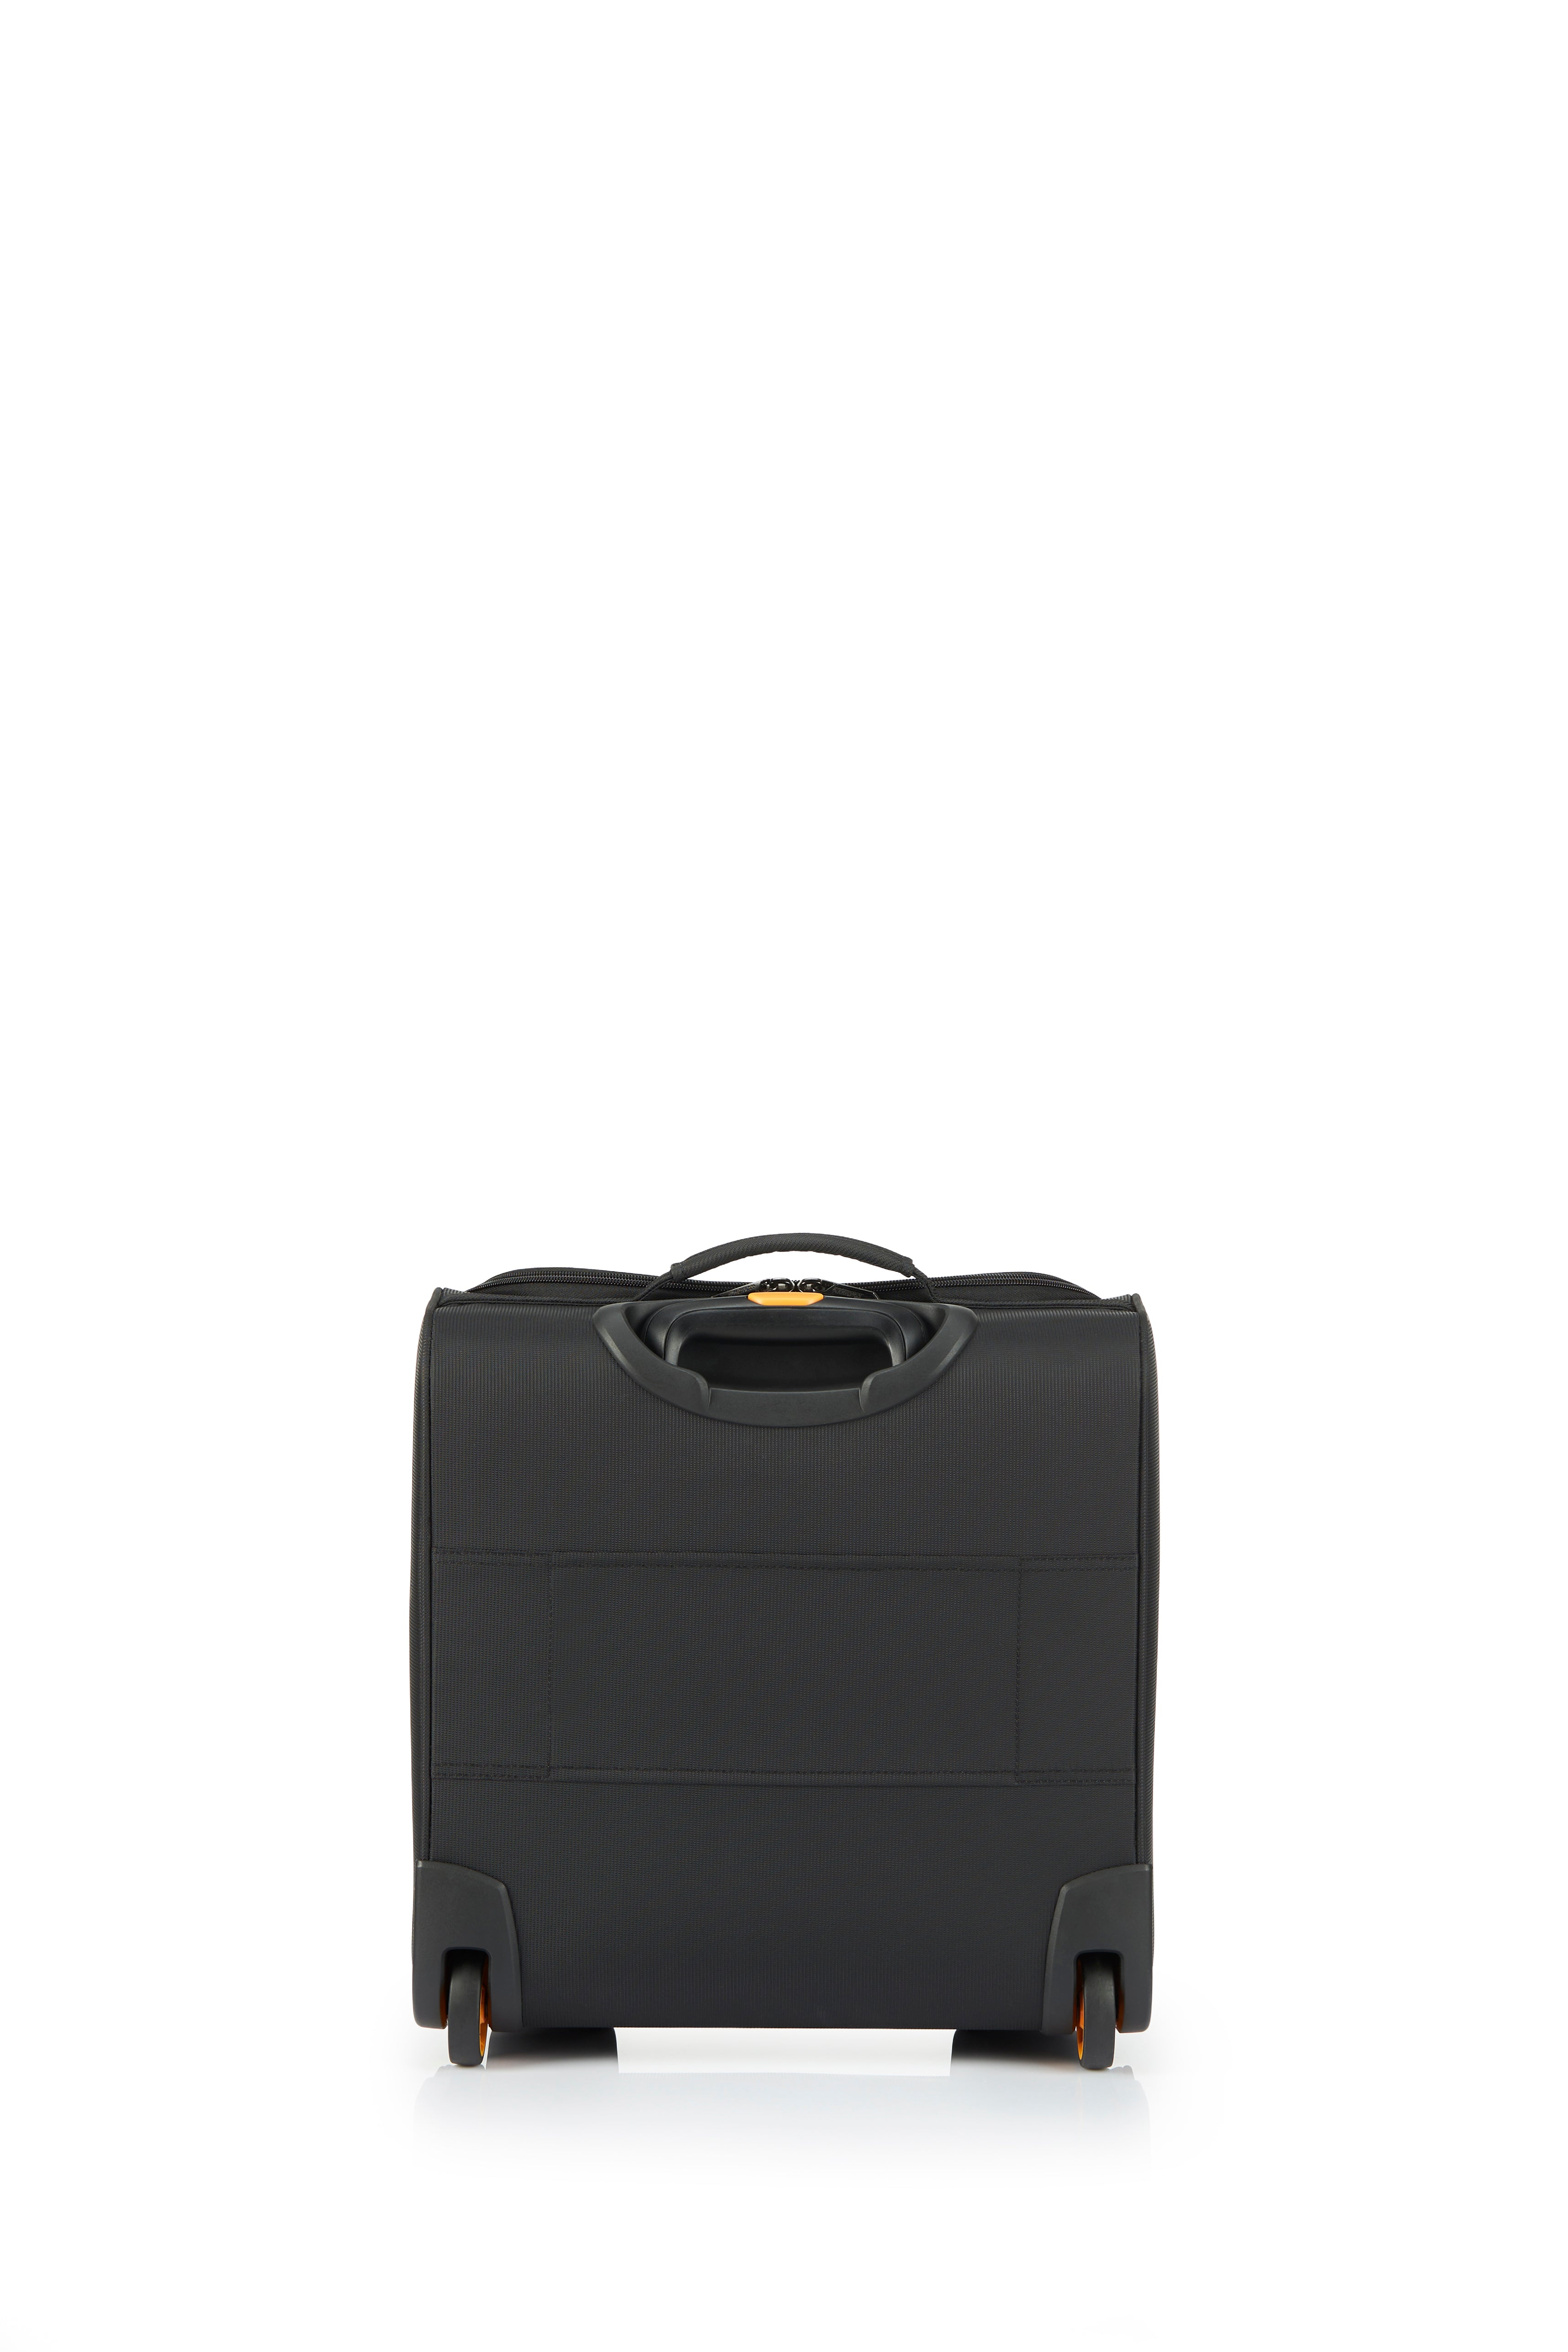 American Tourister - Applite ECO Underseater Suitcase - Black/Must-5